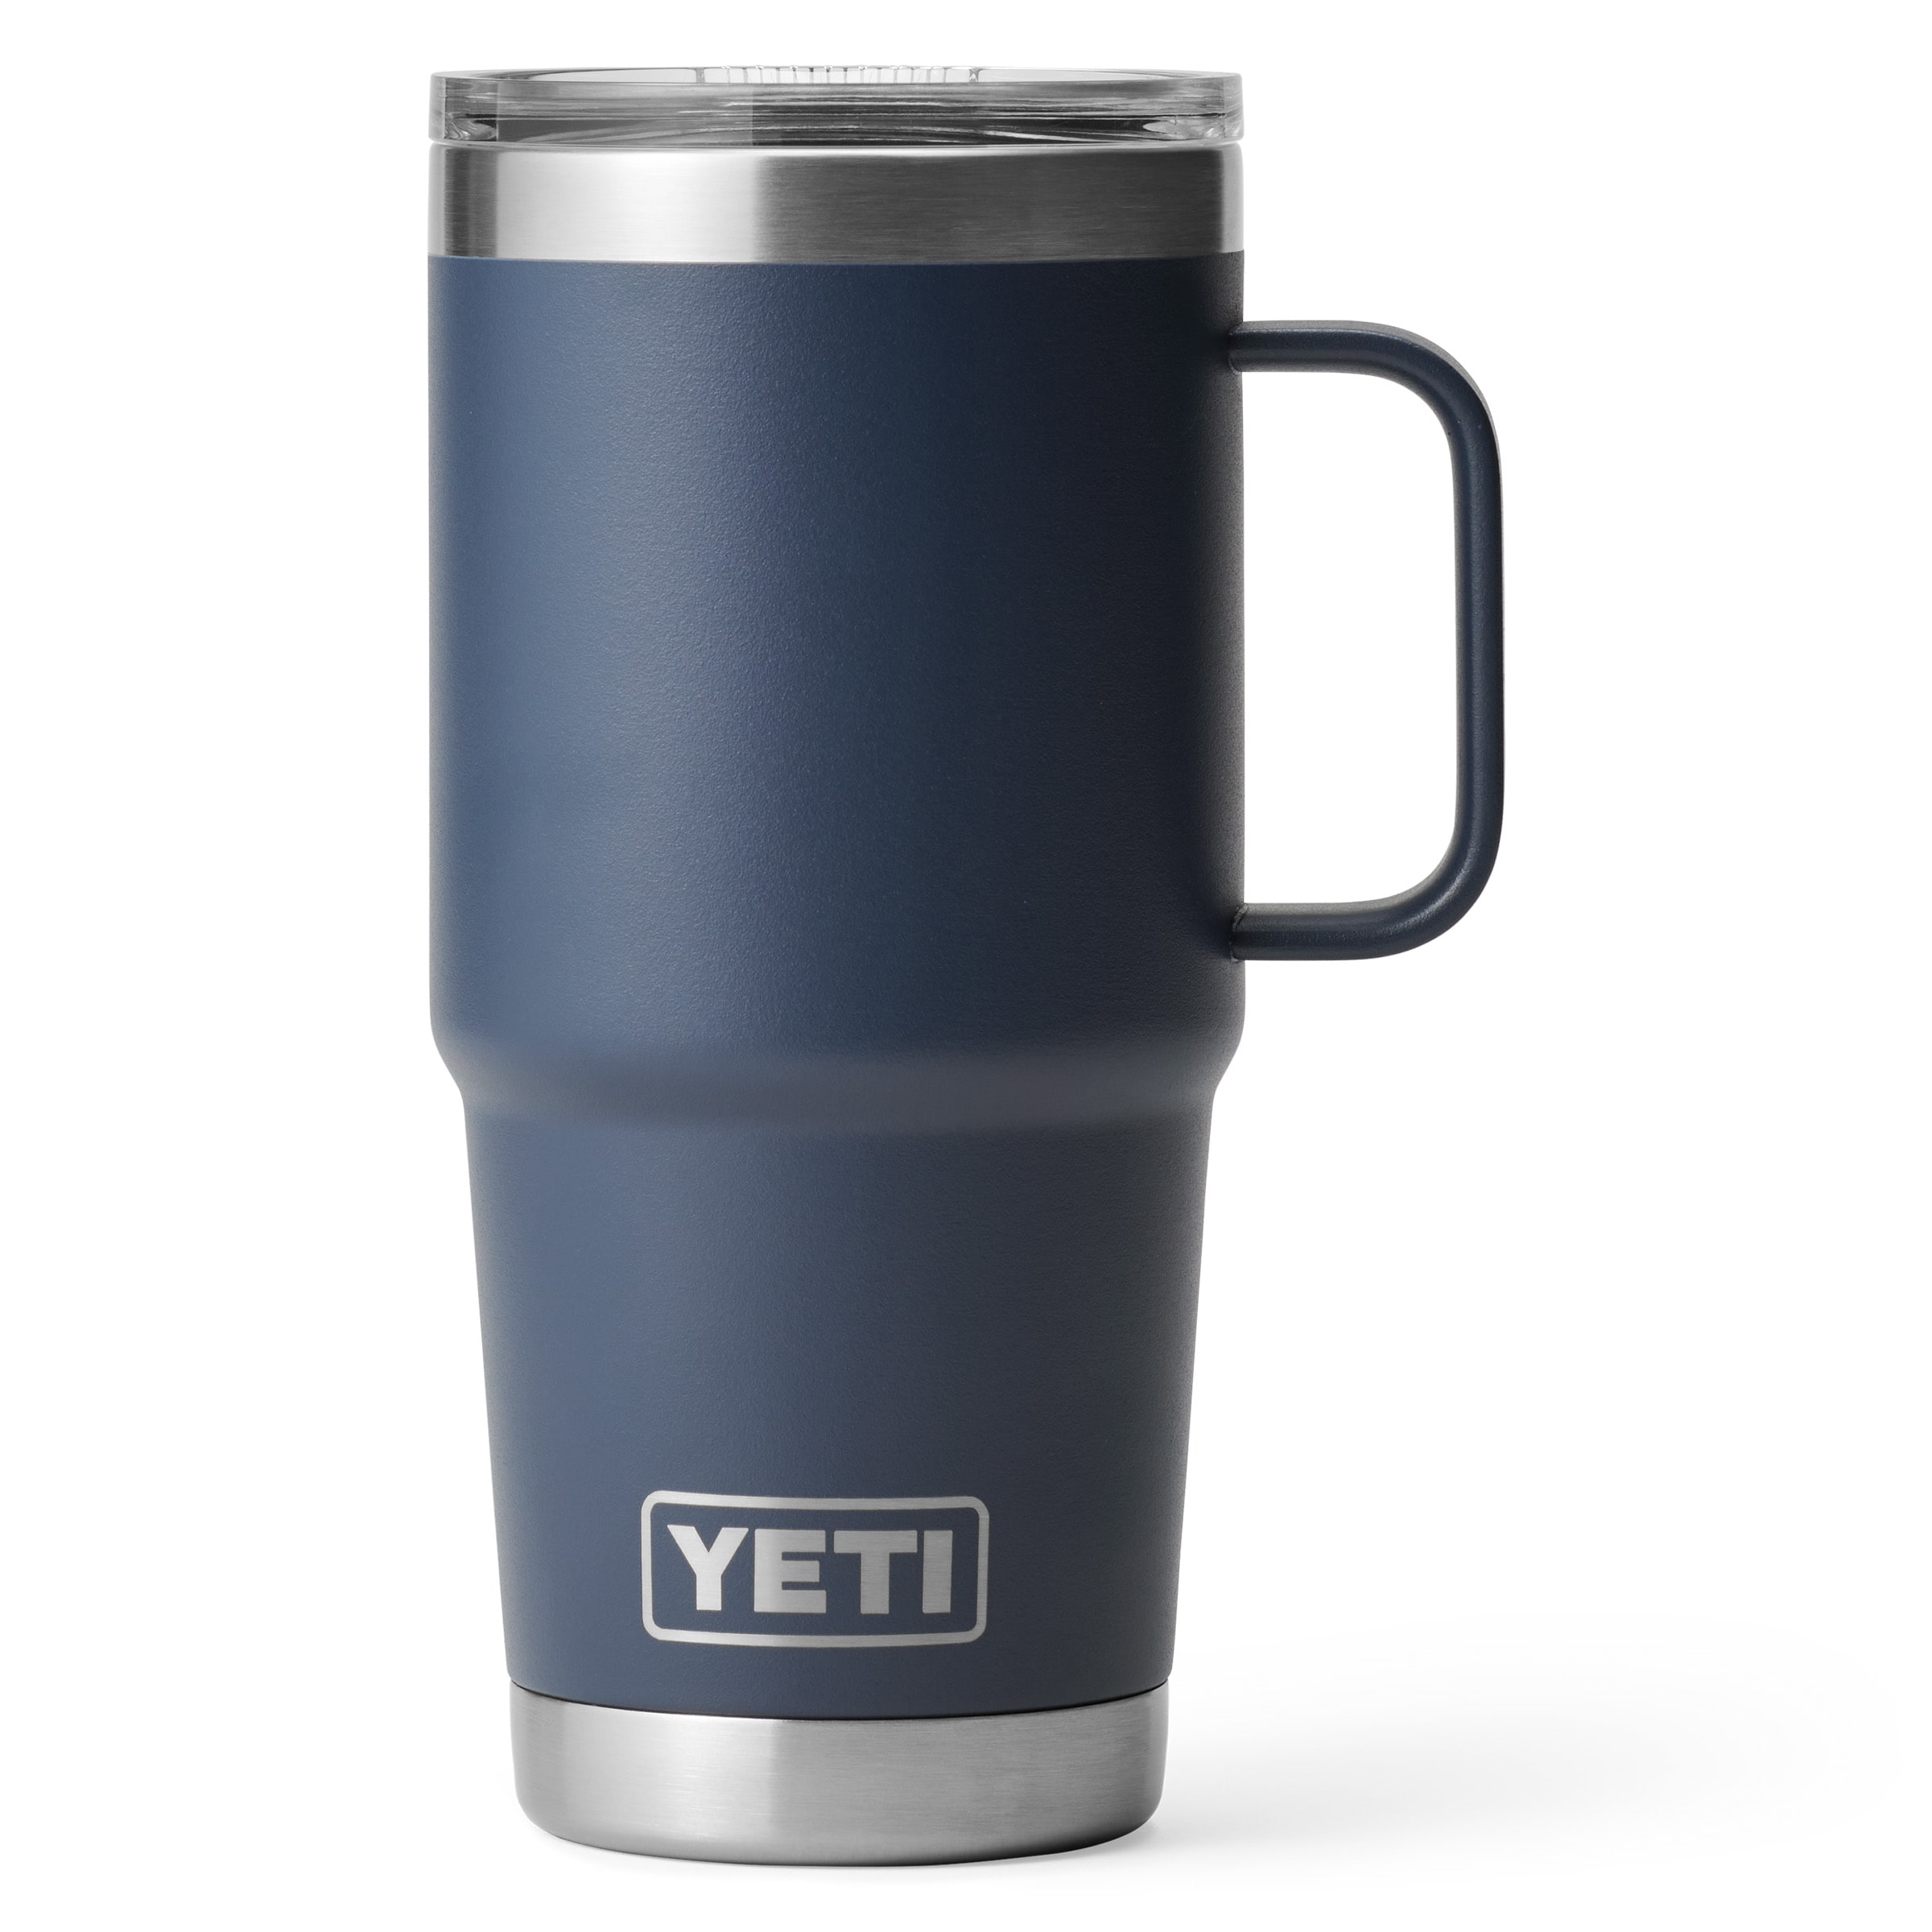 YETI Rambler 20-oz Travel Mug with Stronghold Lid in the Water